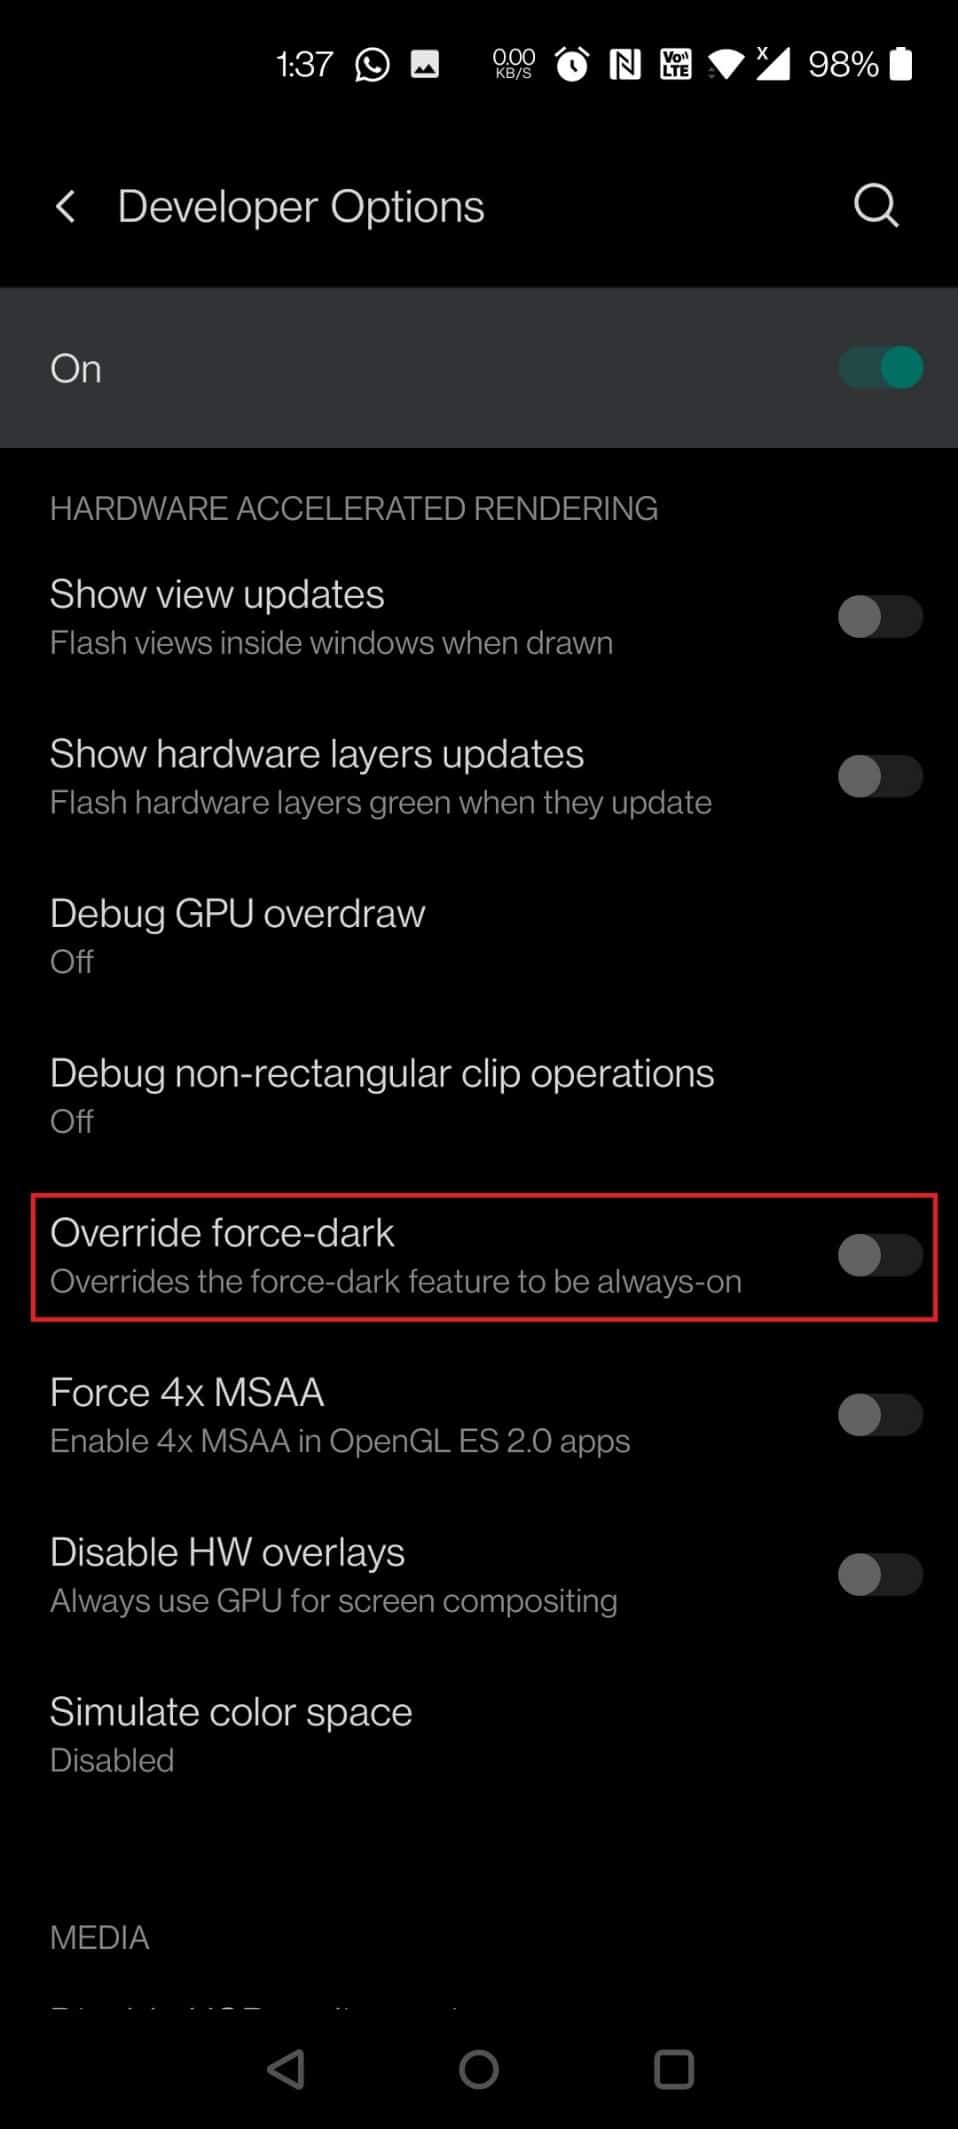 Turn on the toggle for Override force-dark